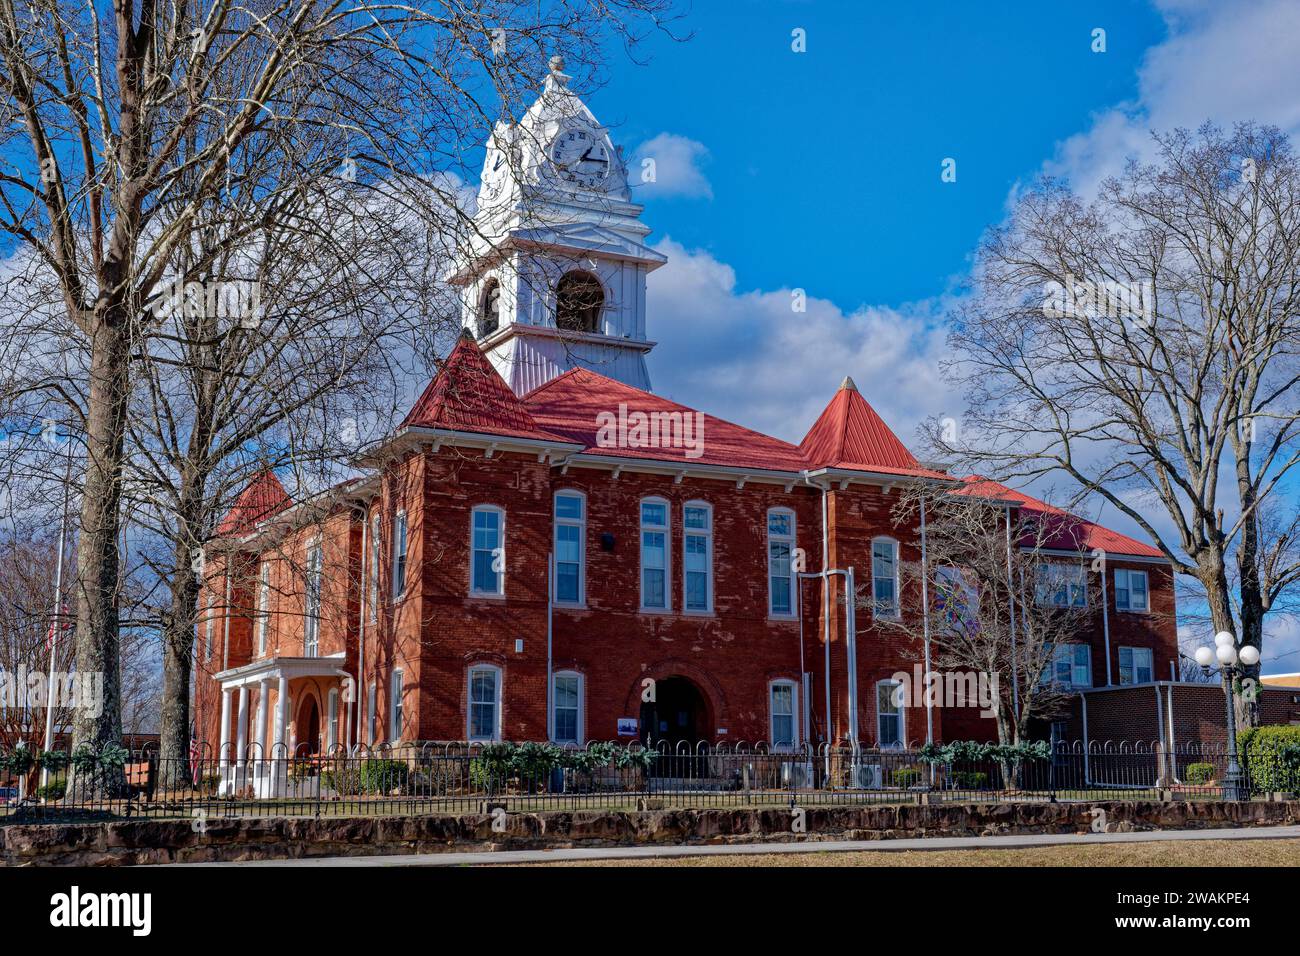 A restored historic building with a clock tower with a bell hanging inside the cupola in downtown Wartburg in the Tennessee mountains on a sunny day i Stock Photo